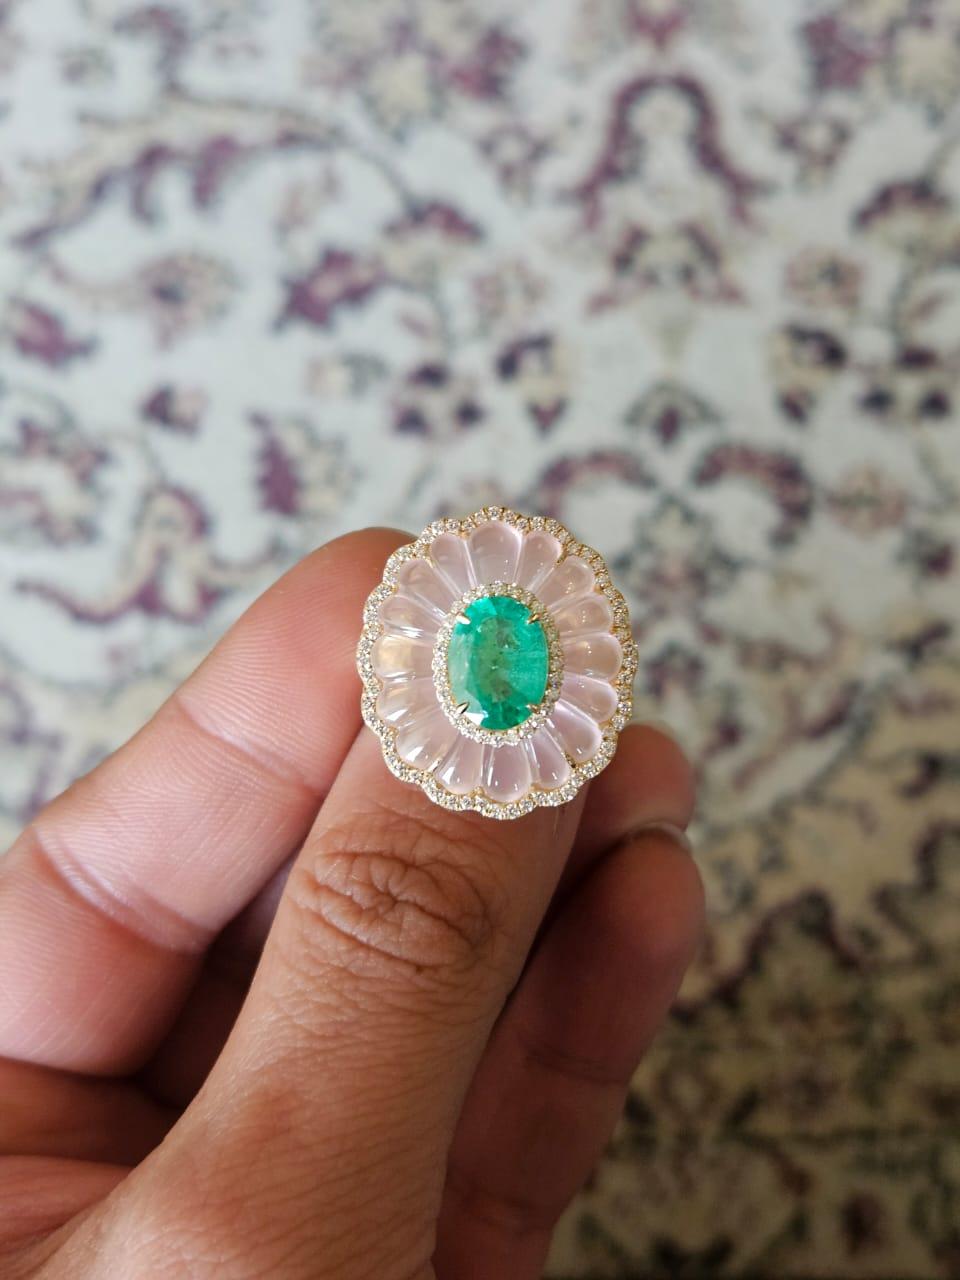 A very beautiful, Emerald & Rose Quartz Cocktail Ring set in 18K  Rose Gold & Diamonds. The weight of the Emerald is 2.28 carats. The Emerald is completely natural, without any treatment  and is of Zambian origin. The weight of the Rose Quartz is